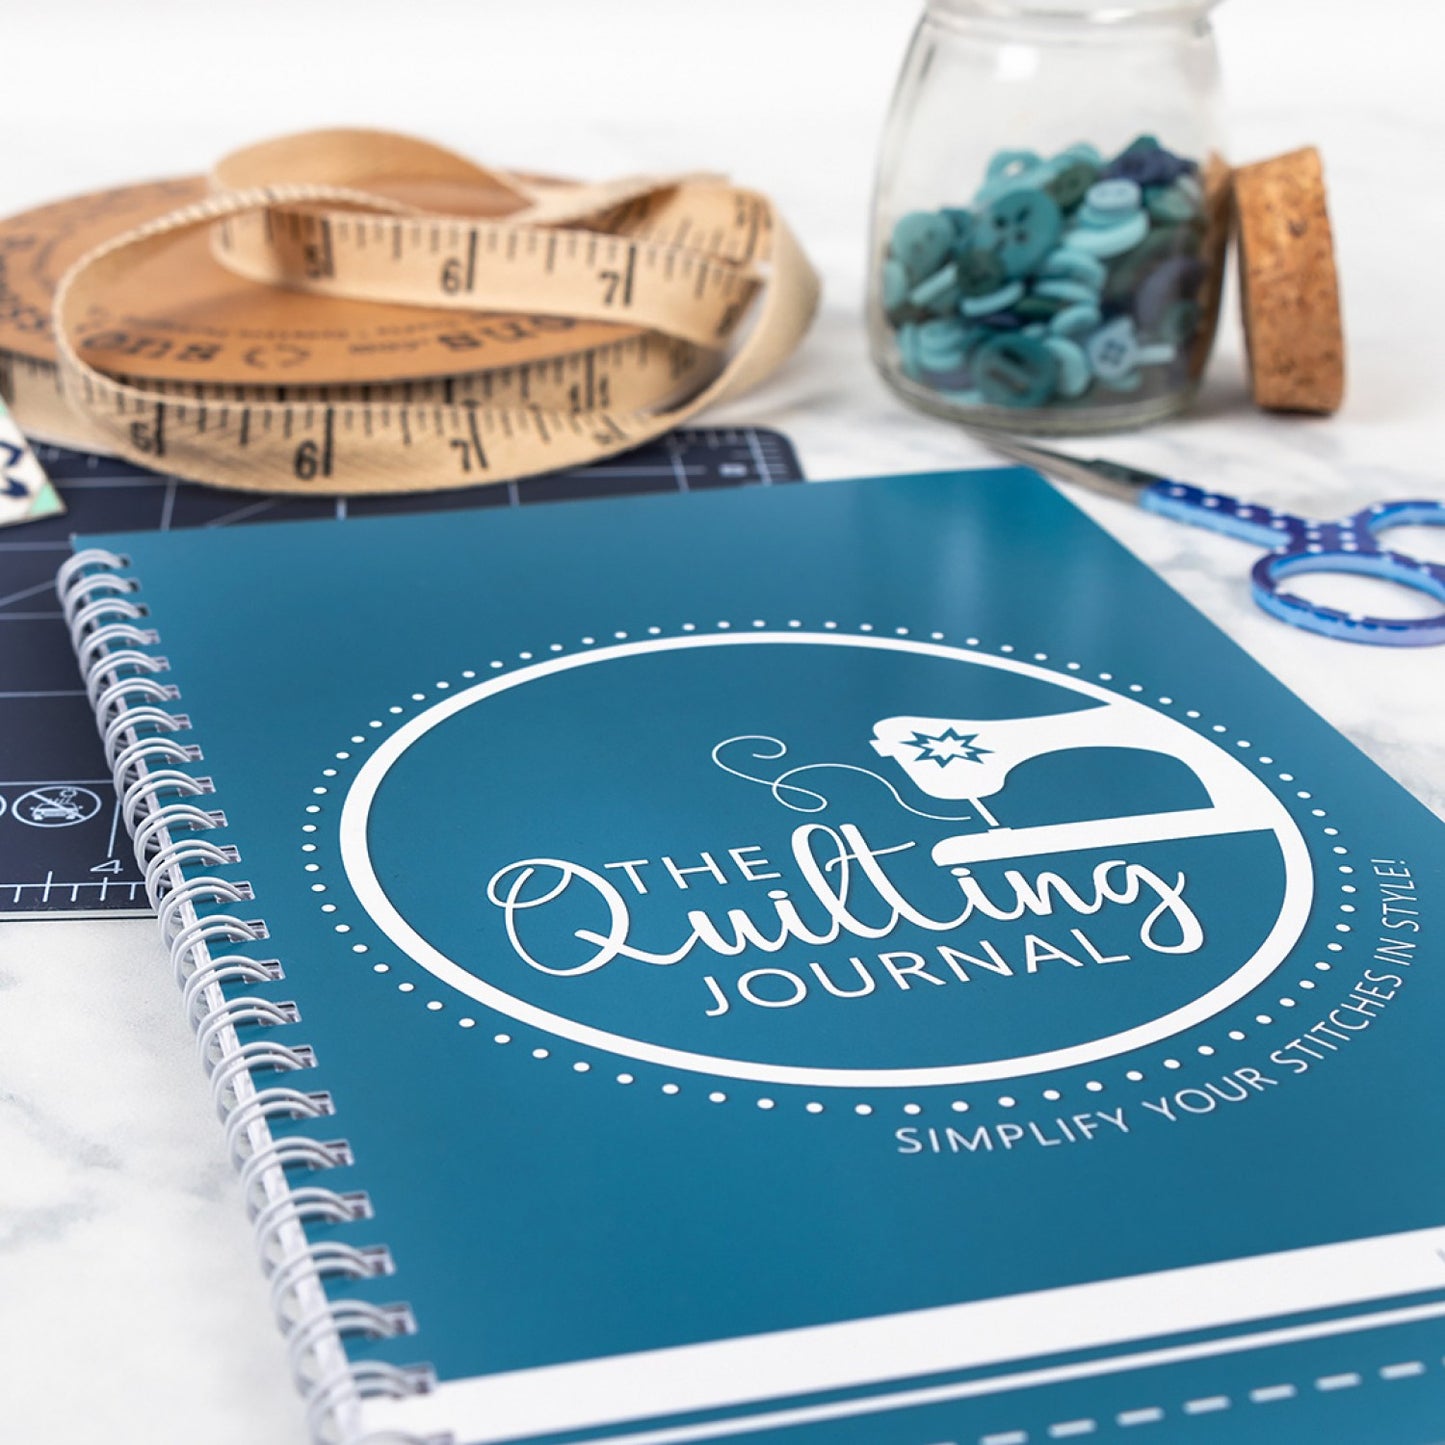 The Quilting Journal